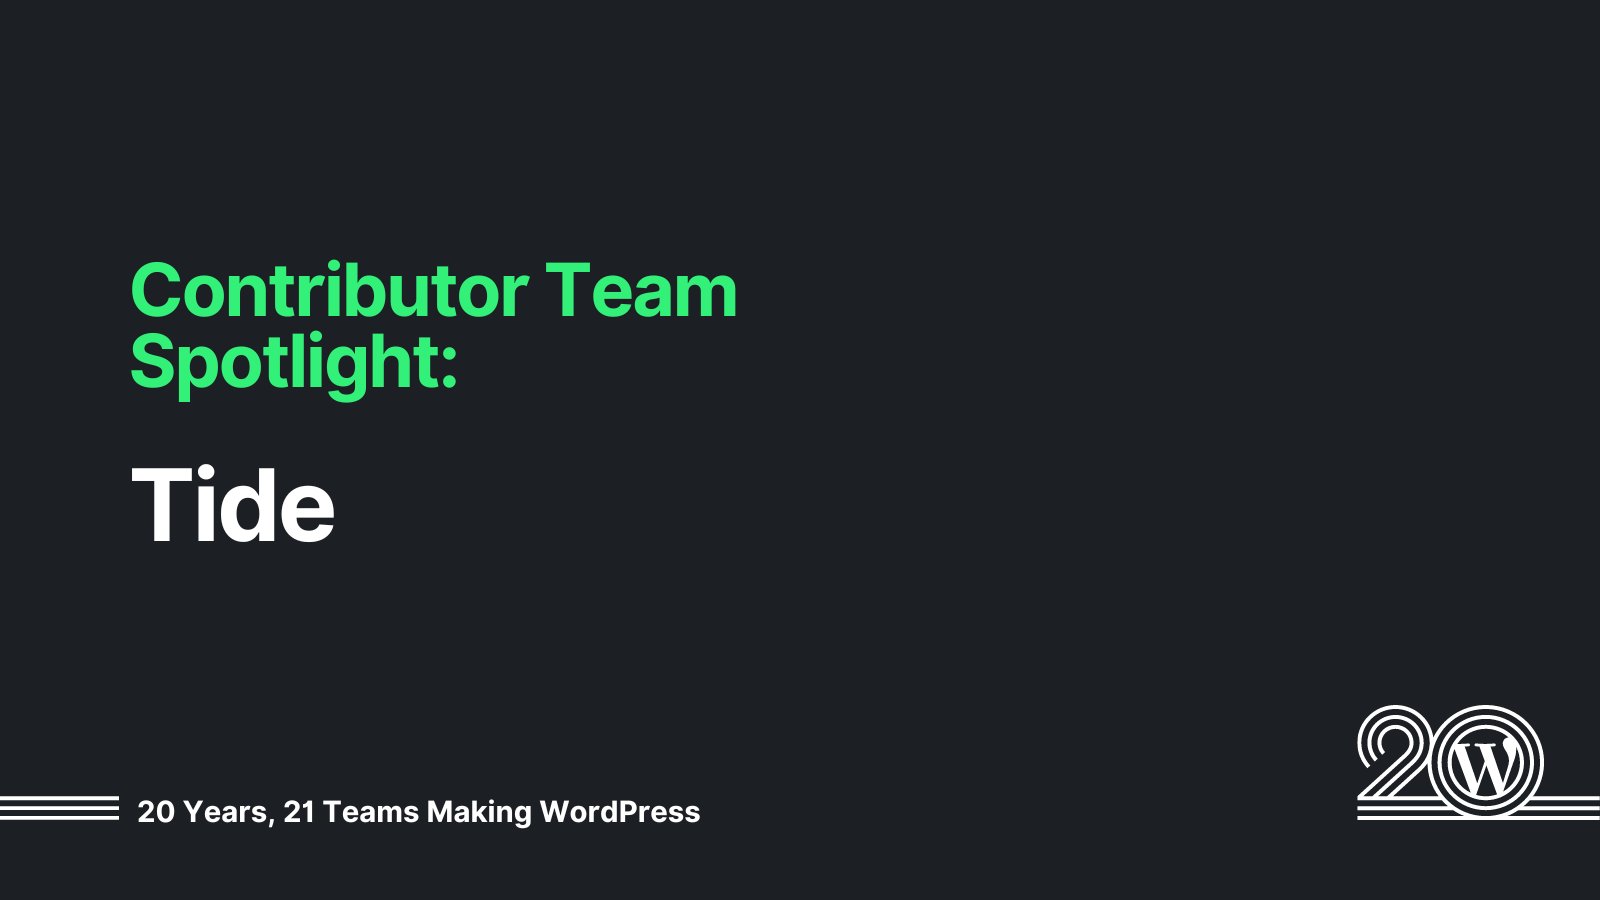 Black background with green and white text that says: Contributor Team Spotlight: Tides. 20 Years, 21 Teams Making WordPress. 